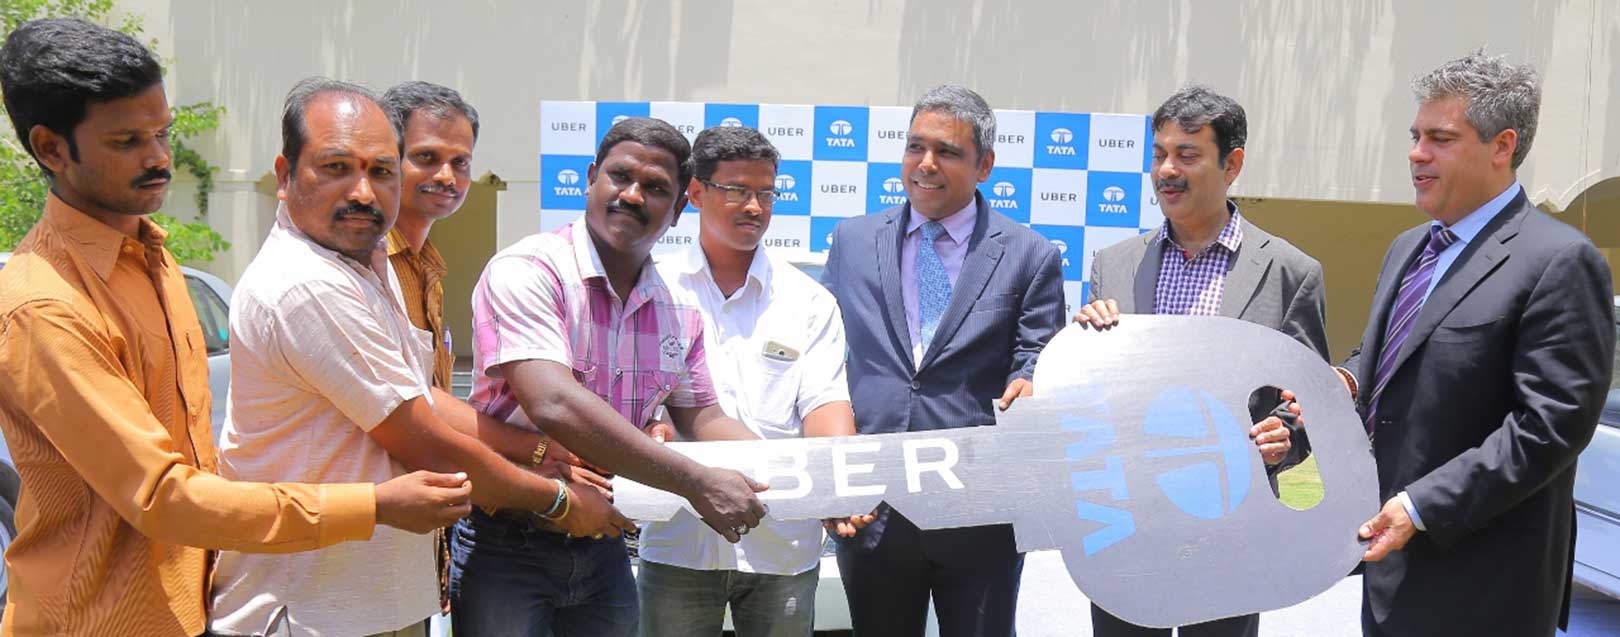 India ranks 2nd in global cab service market: Uber